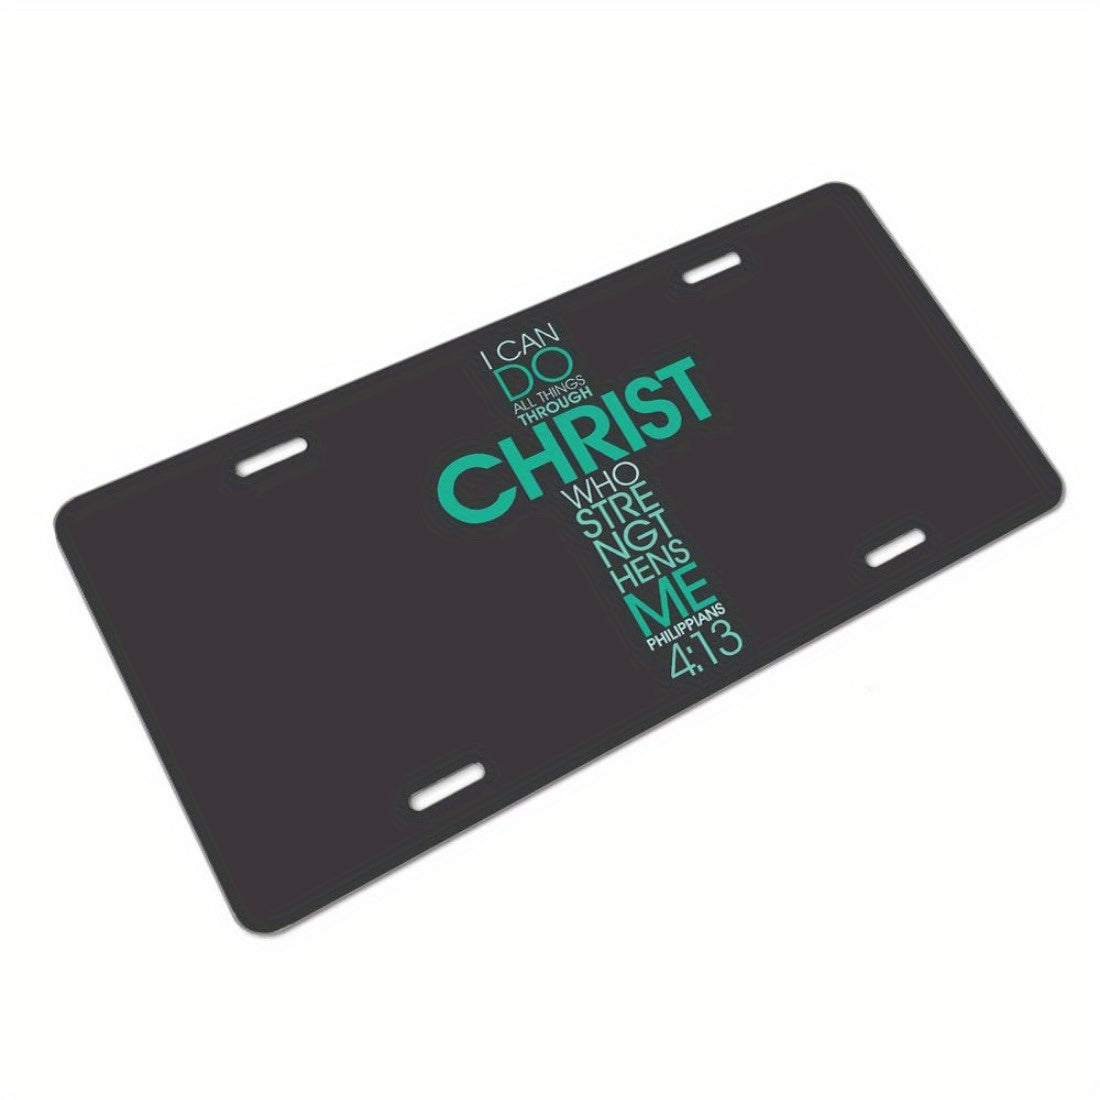 I Can Do All Things Through Christ Who Strengthens Me Christian Front License Plate,6 X 12 Inch claimedbygoddesigns